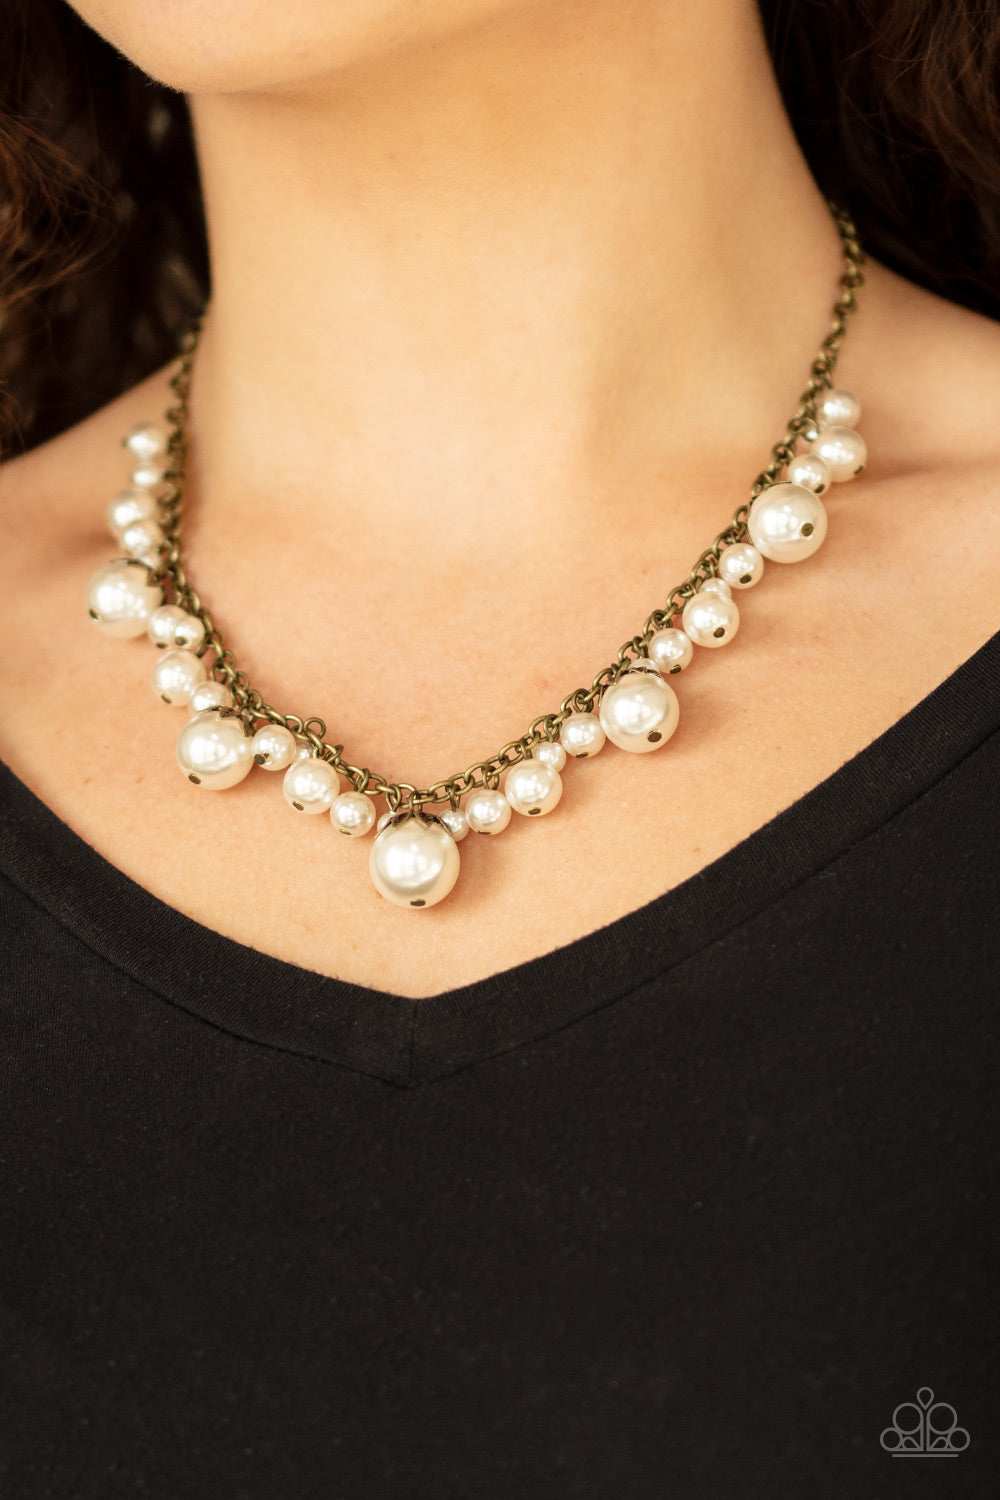 Paparazzi Uptown Pearls - Brass - White Pearls - Necklace & Earrings - $5 Jewelry with Ashley Swint